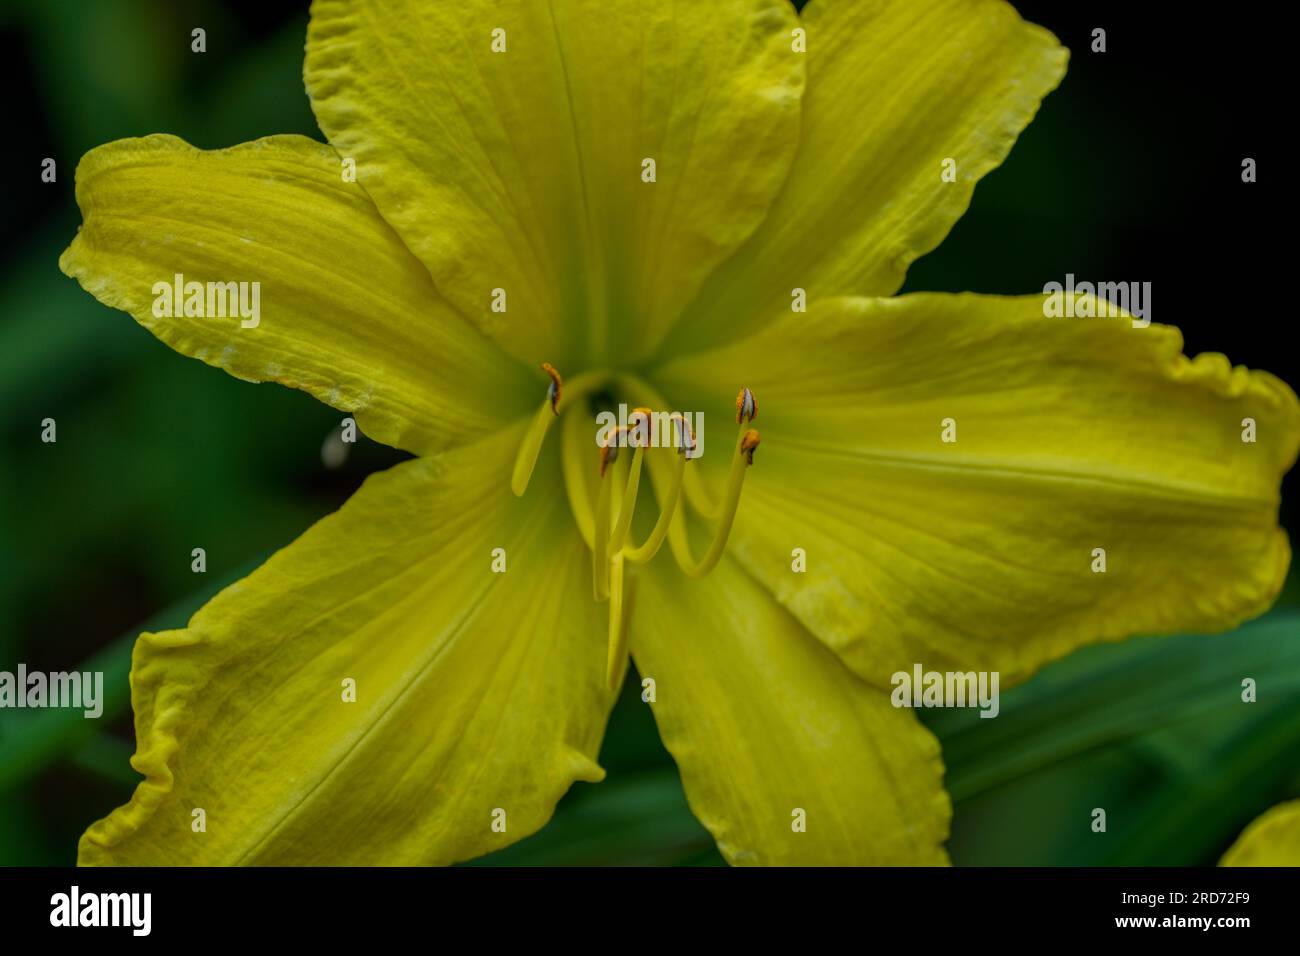 Lush,colorful vivid yellowday lily flower close up Stock Photo